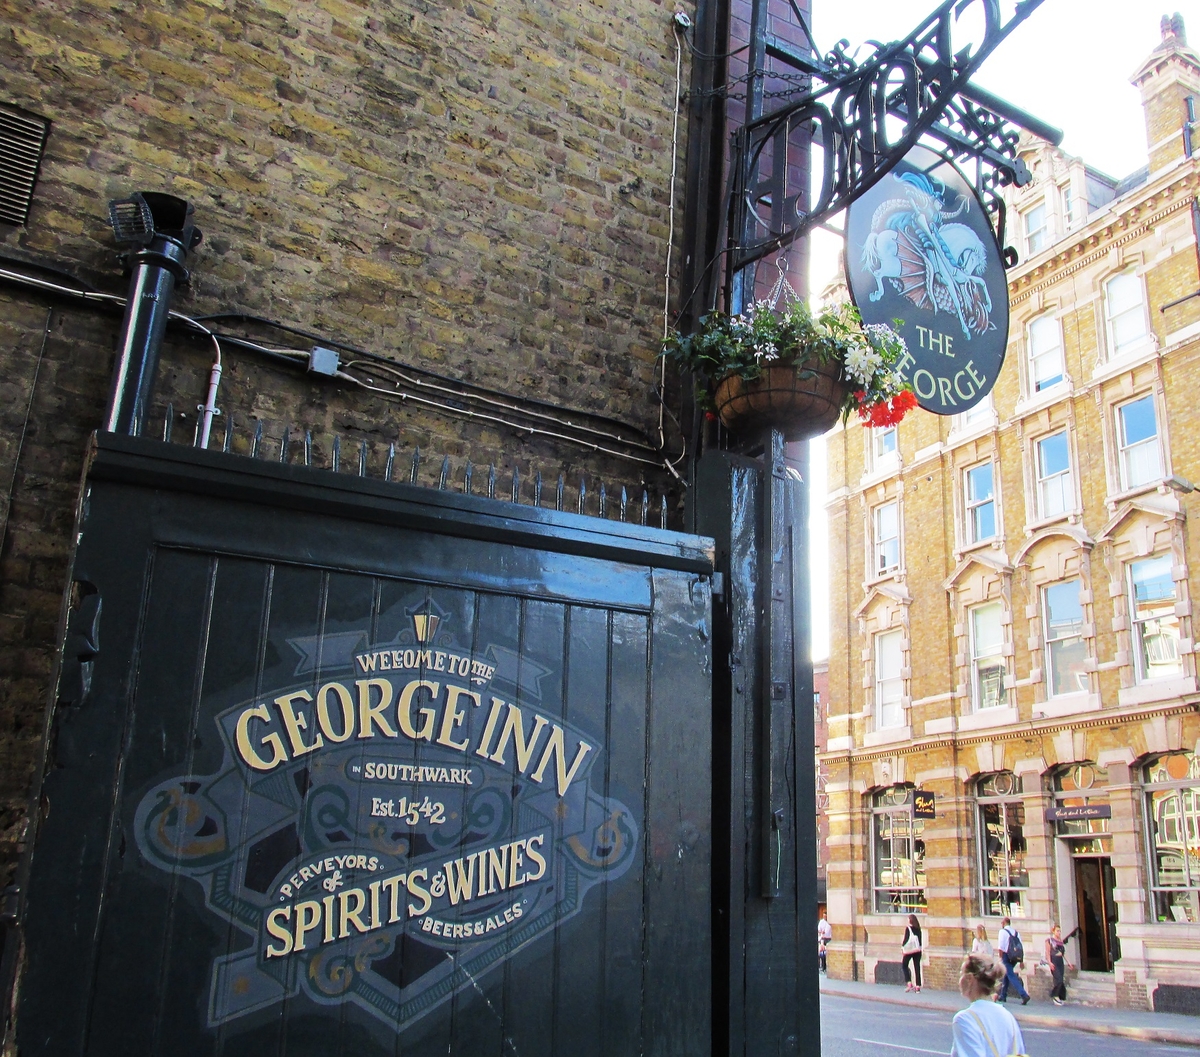 the george inn street sign and entrance gate